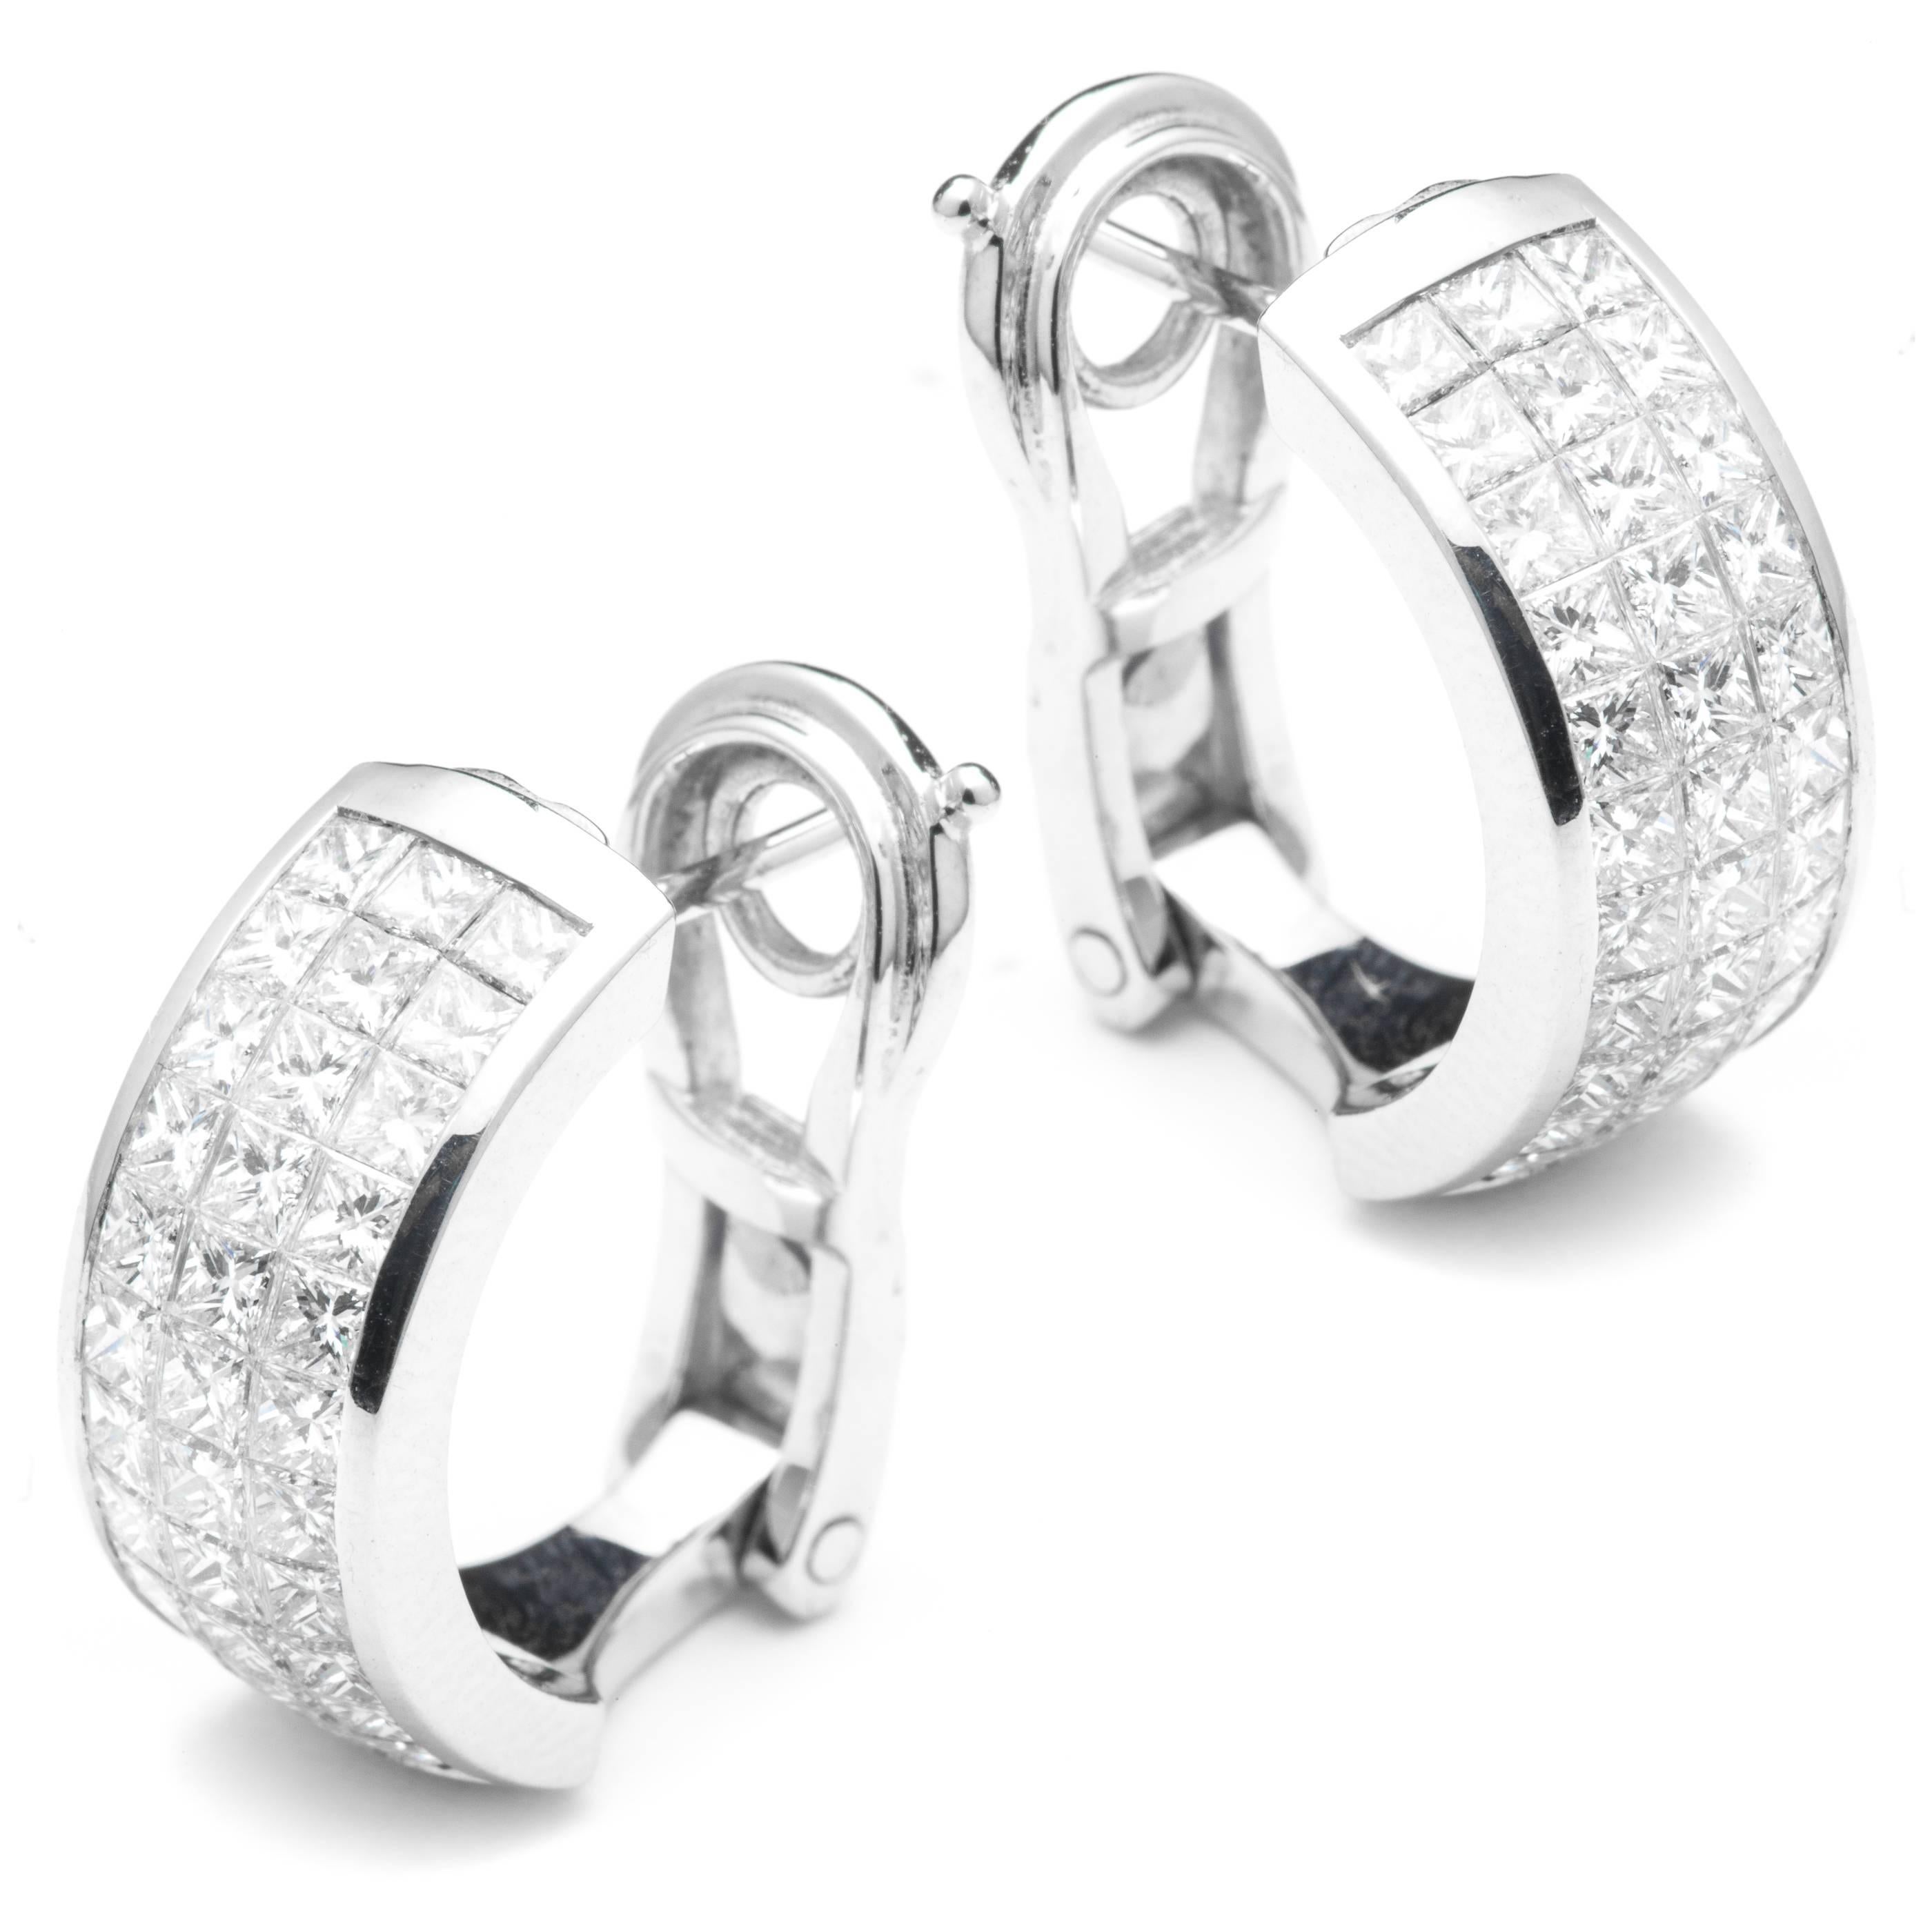 Beacon Hill Jewelers Presents:

A high quality pair of 18 karat white gold princess cut diamond earrings.  Featuring a total of sixty six invisible set princess cut diamonds these earrings boast a combined weight of 3.96 carats.

Grading as